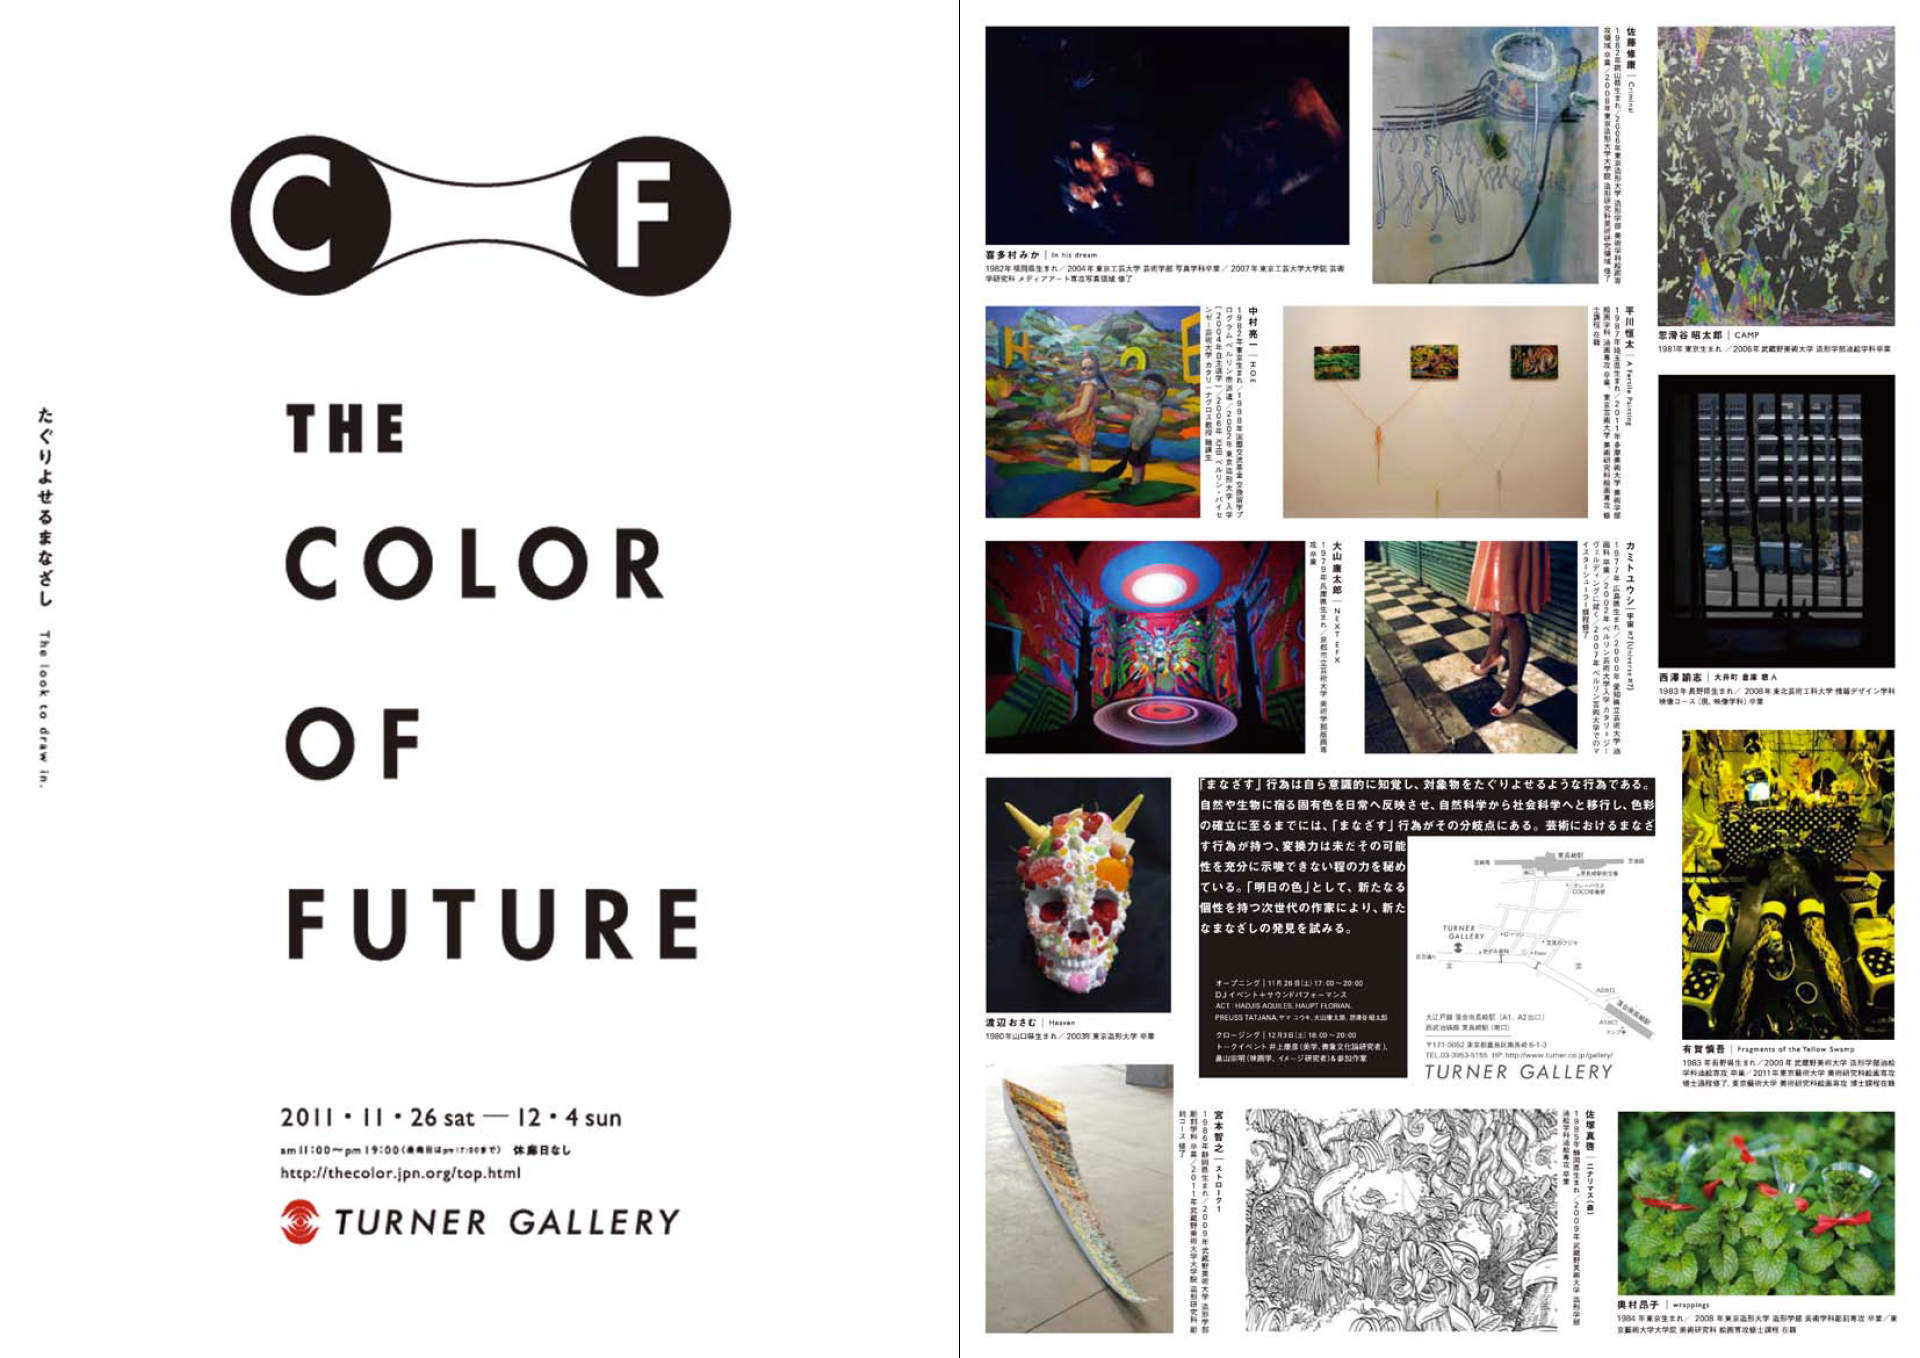 Turner Gallery THE COLOR OF FUTURE exhibition poster